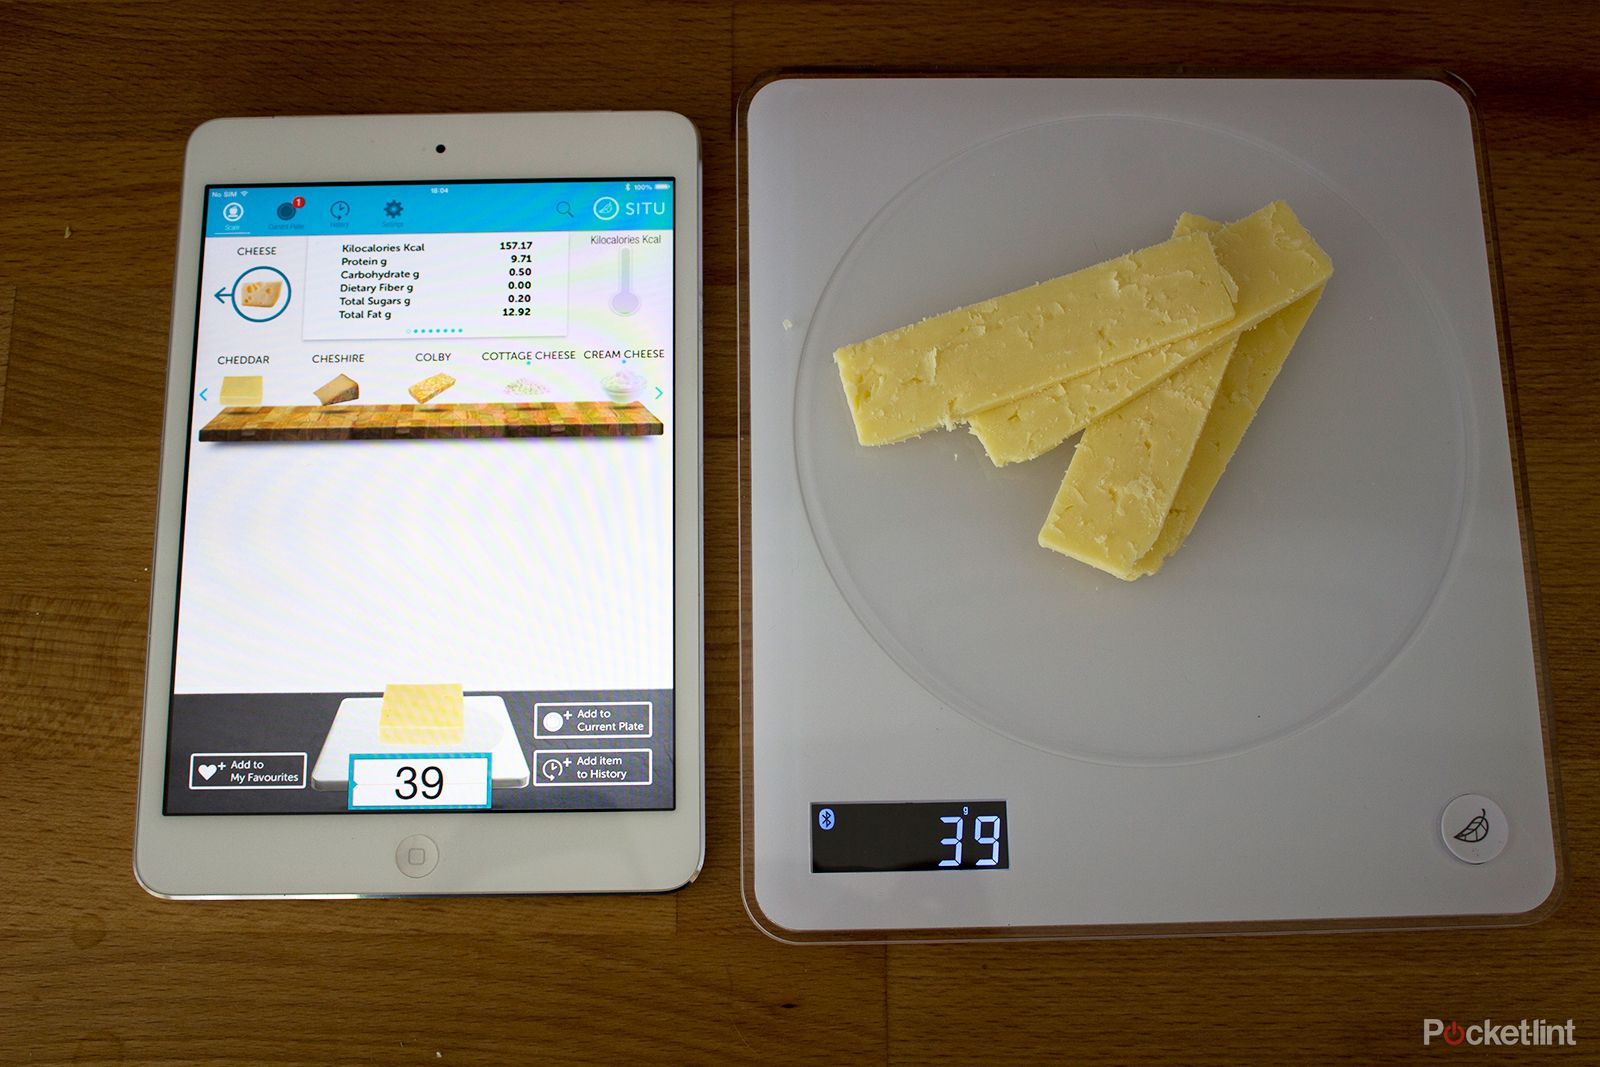 calorie counting just got easy situ smart scale even tracks vitamin intake image 8